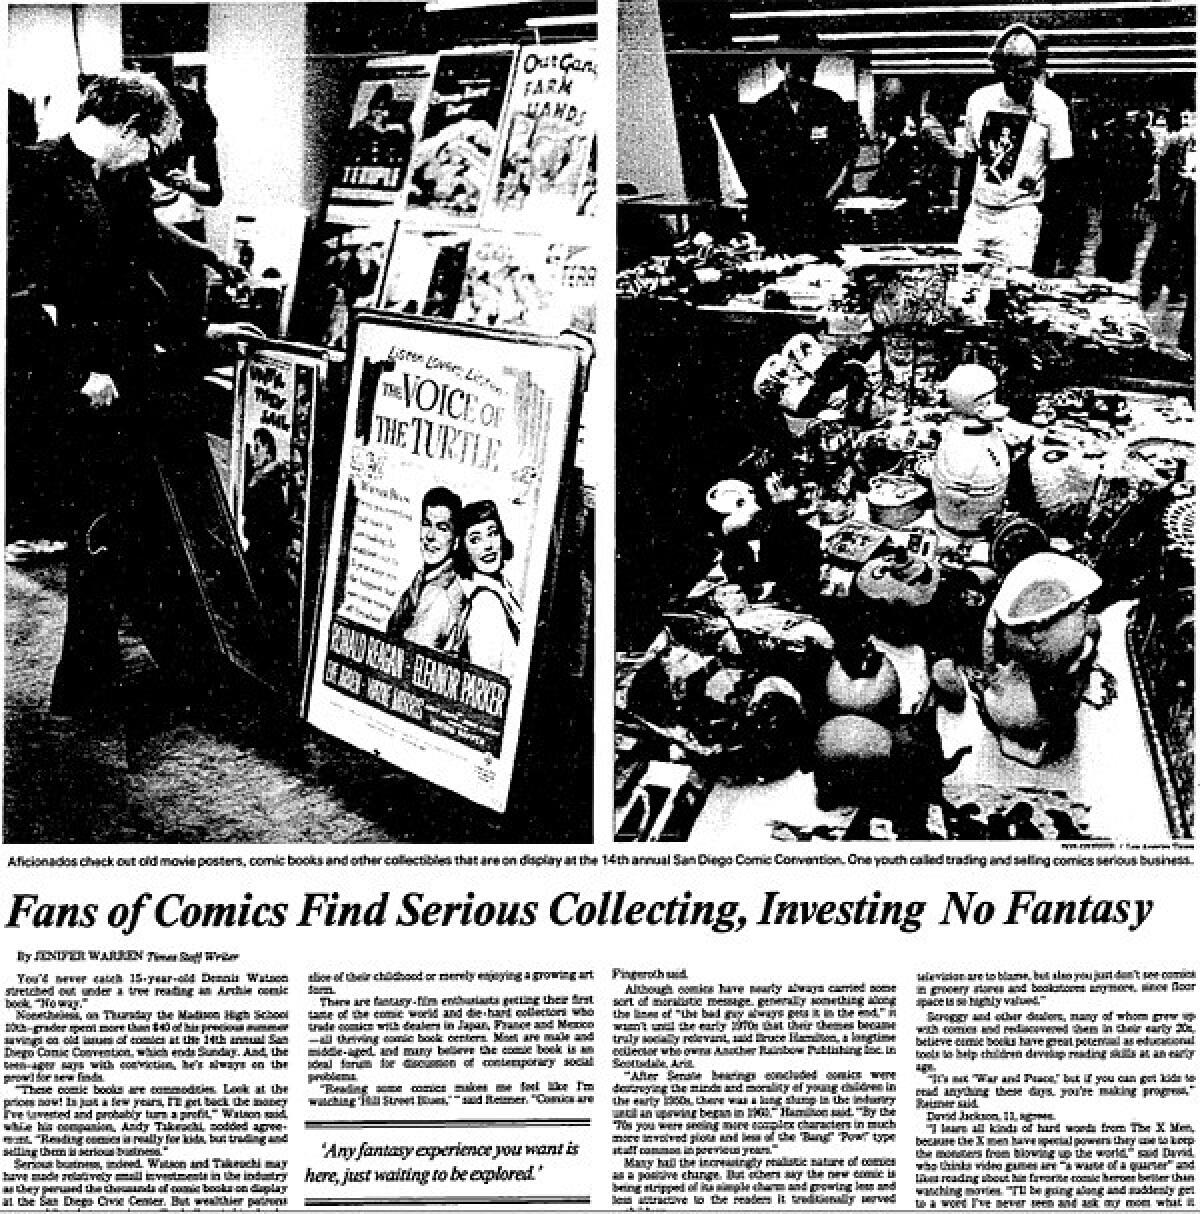 Times contributor Warren Jenifer wrote this article on the culture of collecting and monetizing comic books on Aug 5, 1983.